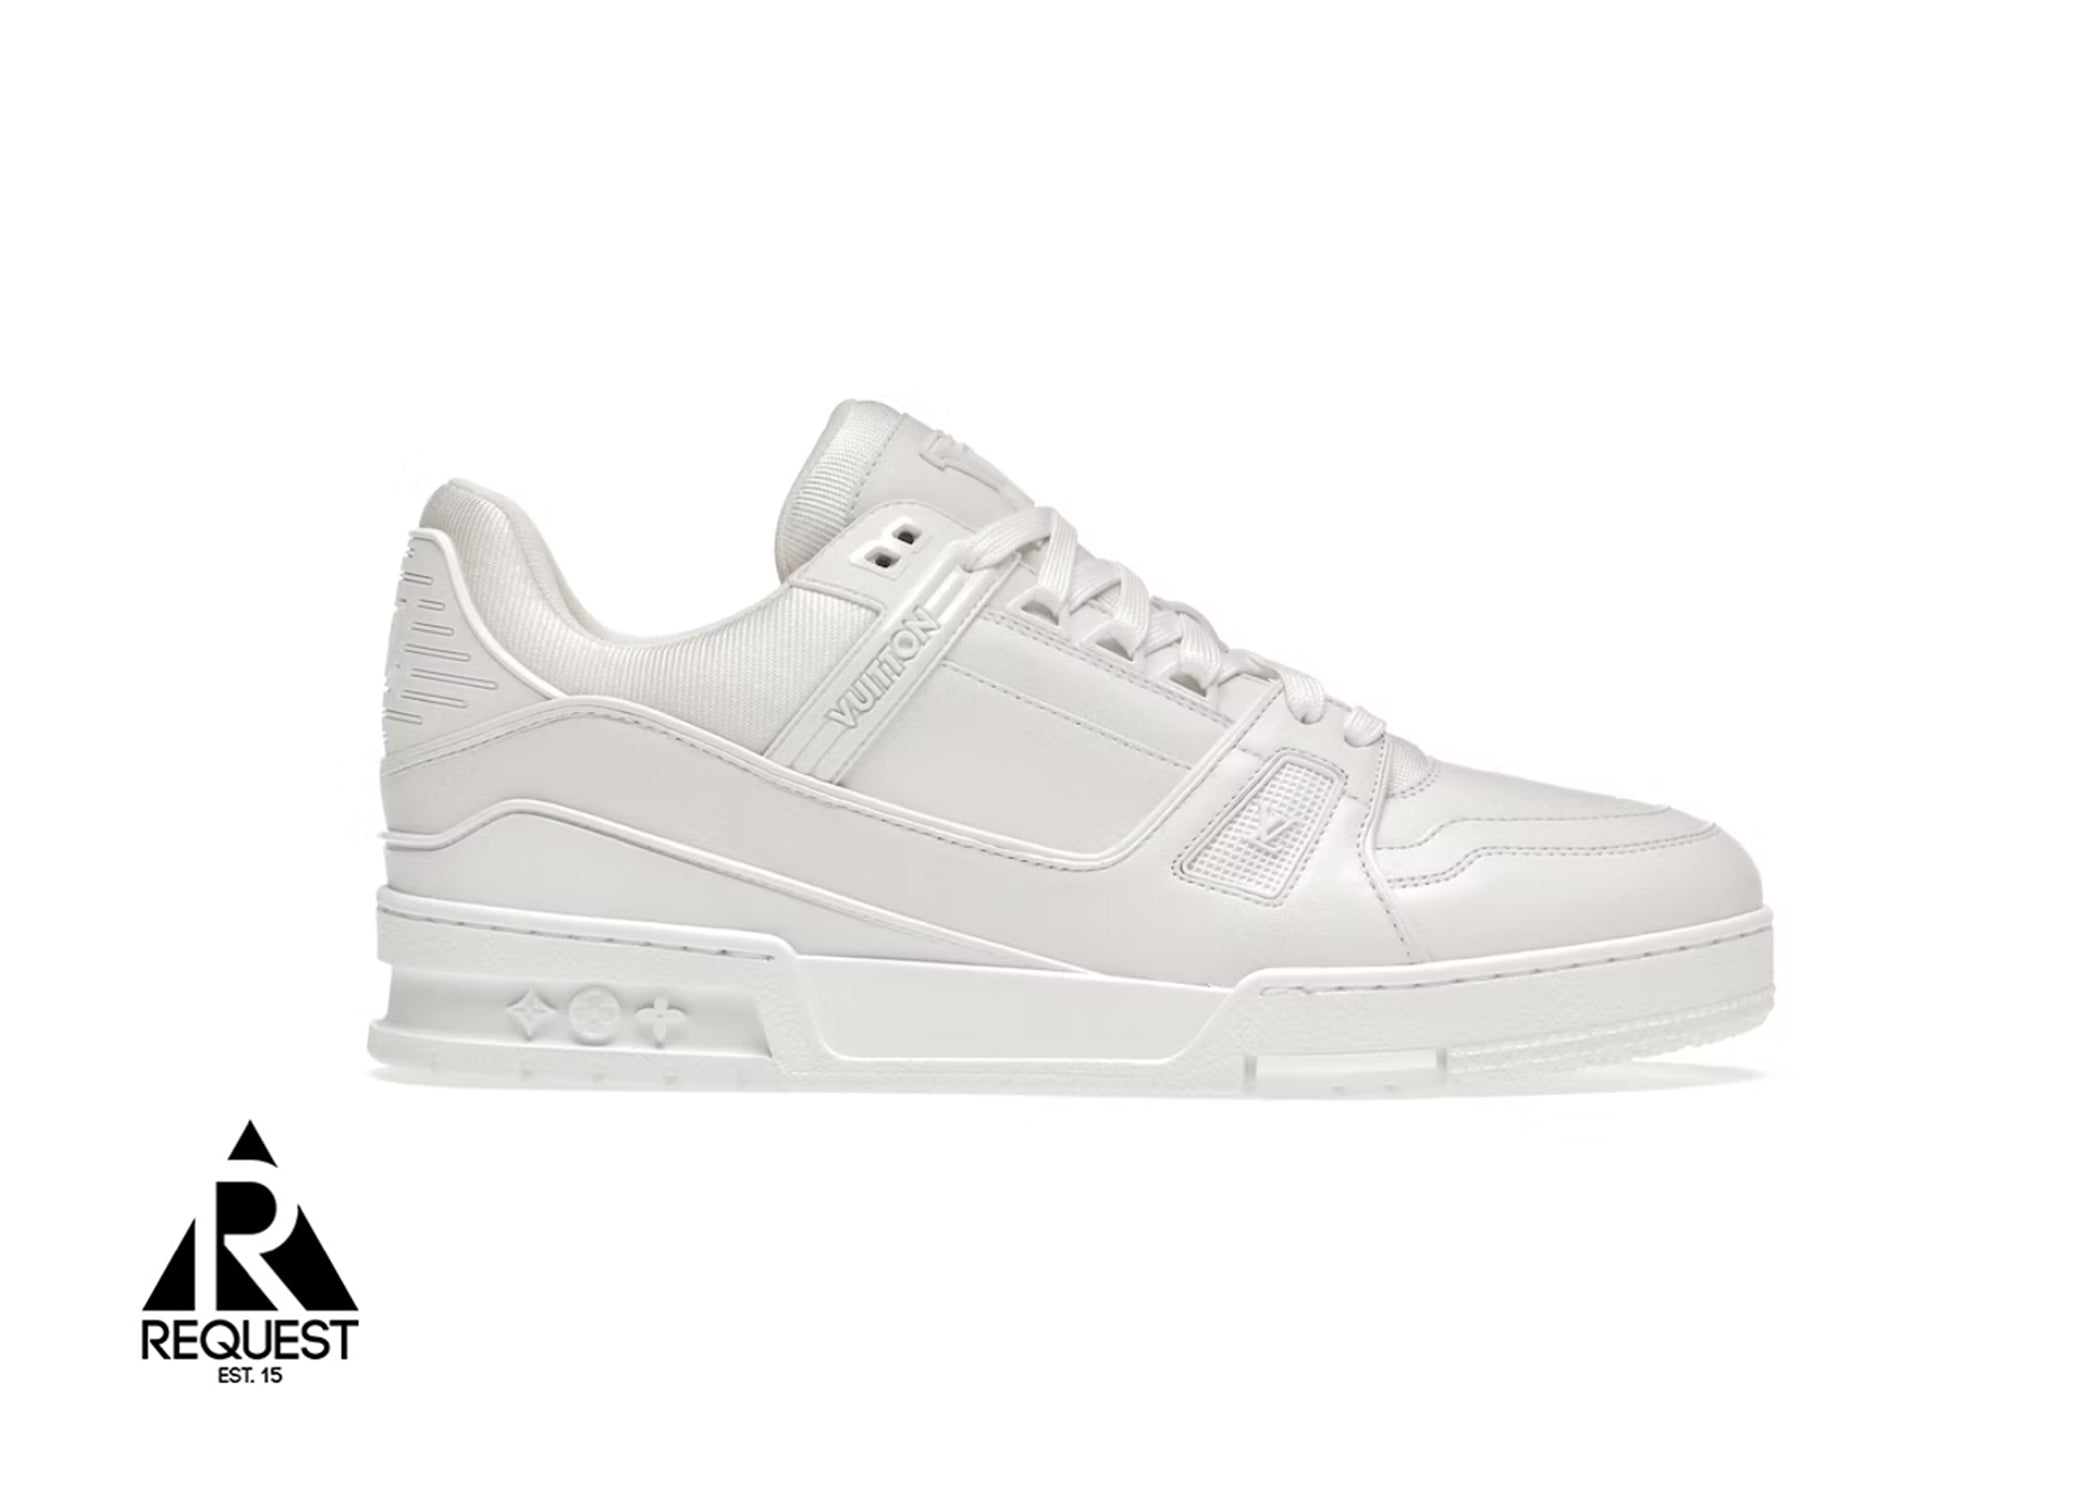 louis vuitton trainers all white